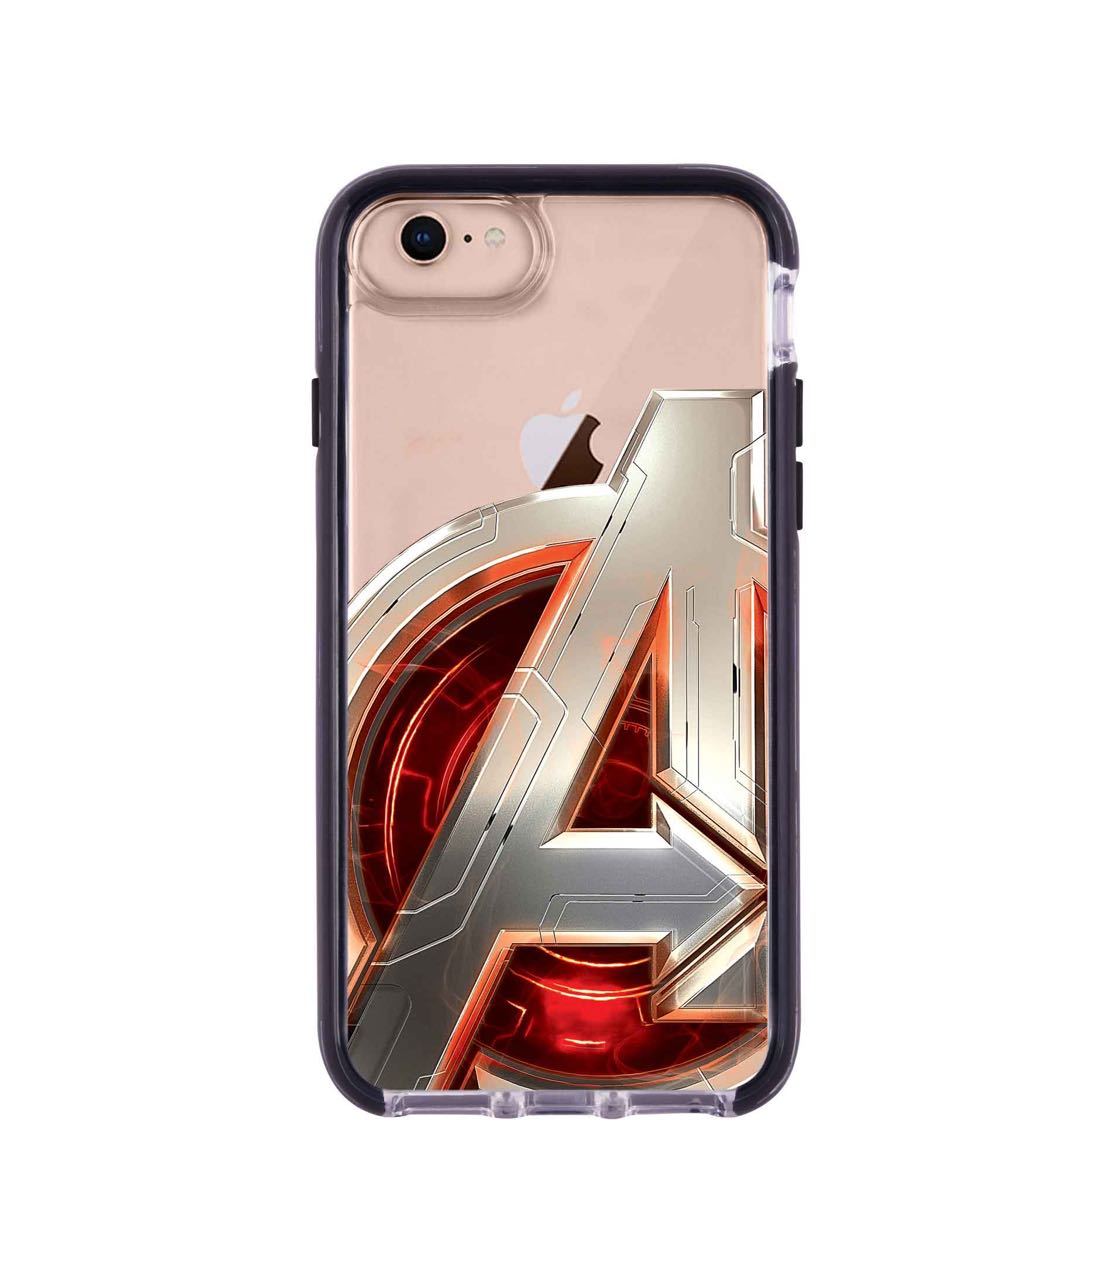 Avengers Version 2 - Extreme Phone Case for iPhone 8